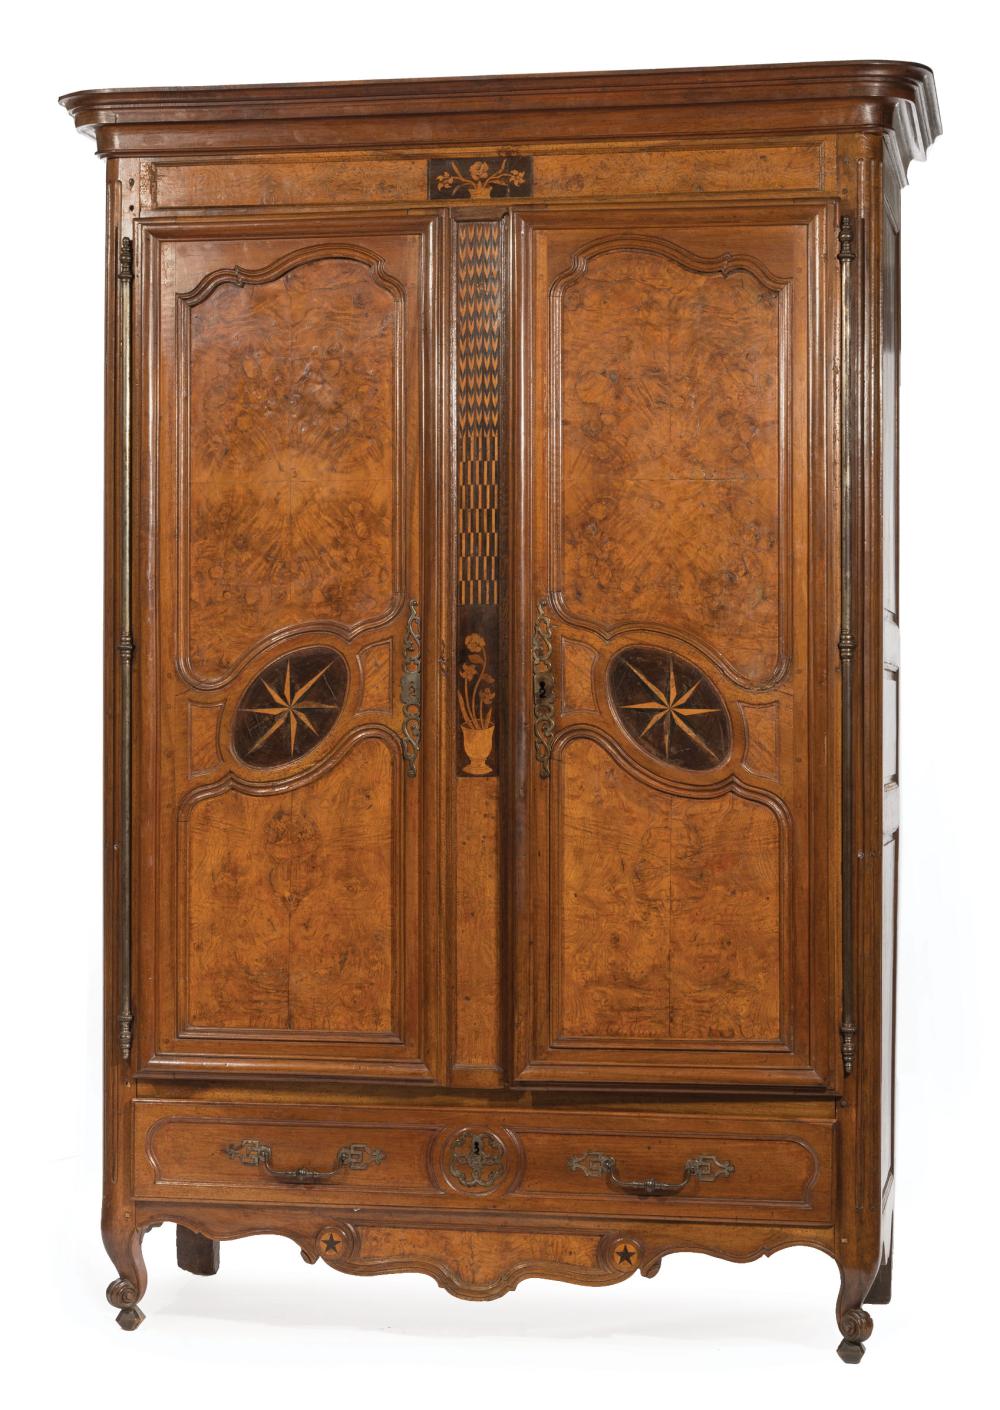 FRENCH INLAID AND BURL WALNUT ARMOIREAntique 31a04f